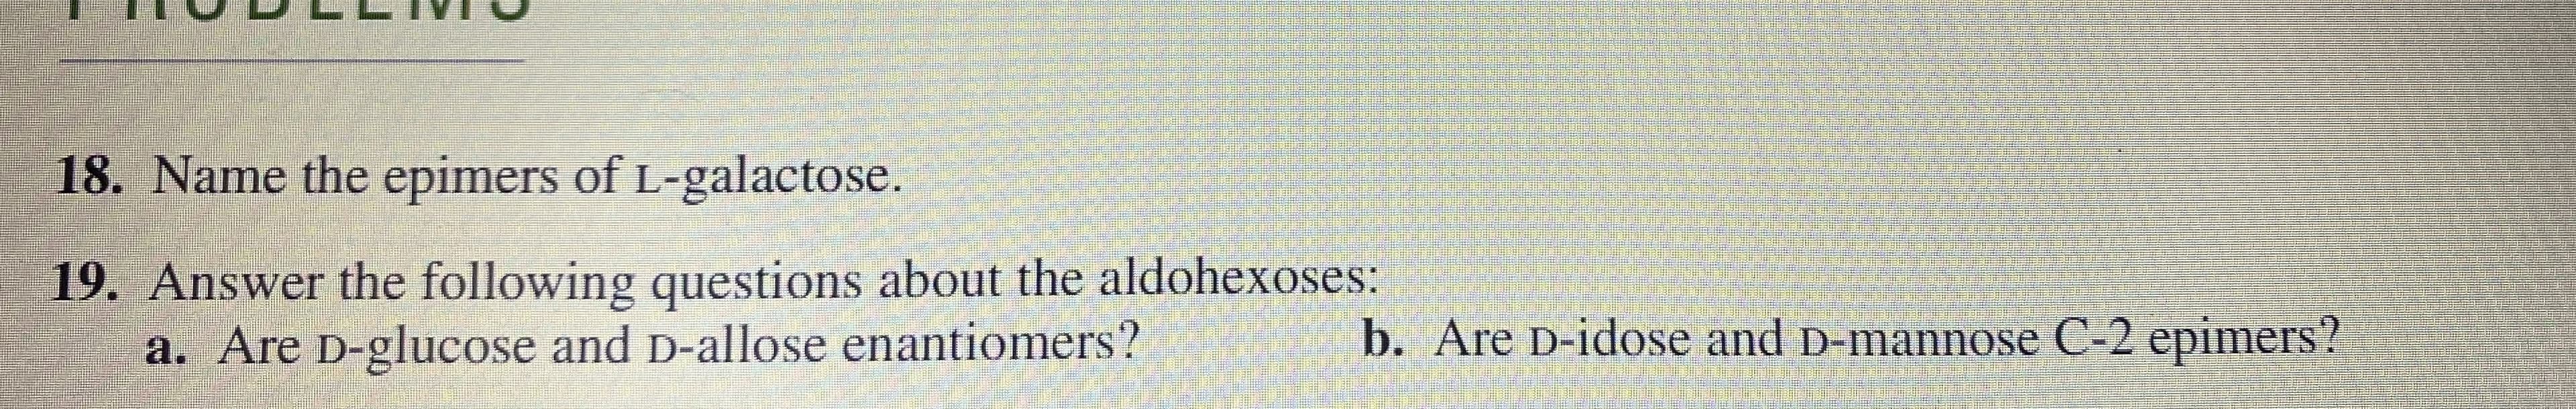 19. Answer the following questions about the aldohexoses:
a. Are D-glucose and D-allose enantiomers?
b. Are D-idose and D-mannose C-2 epimers?
